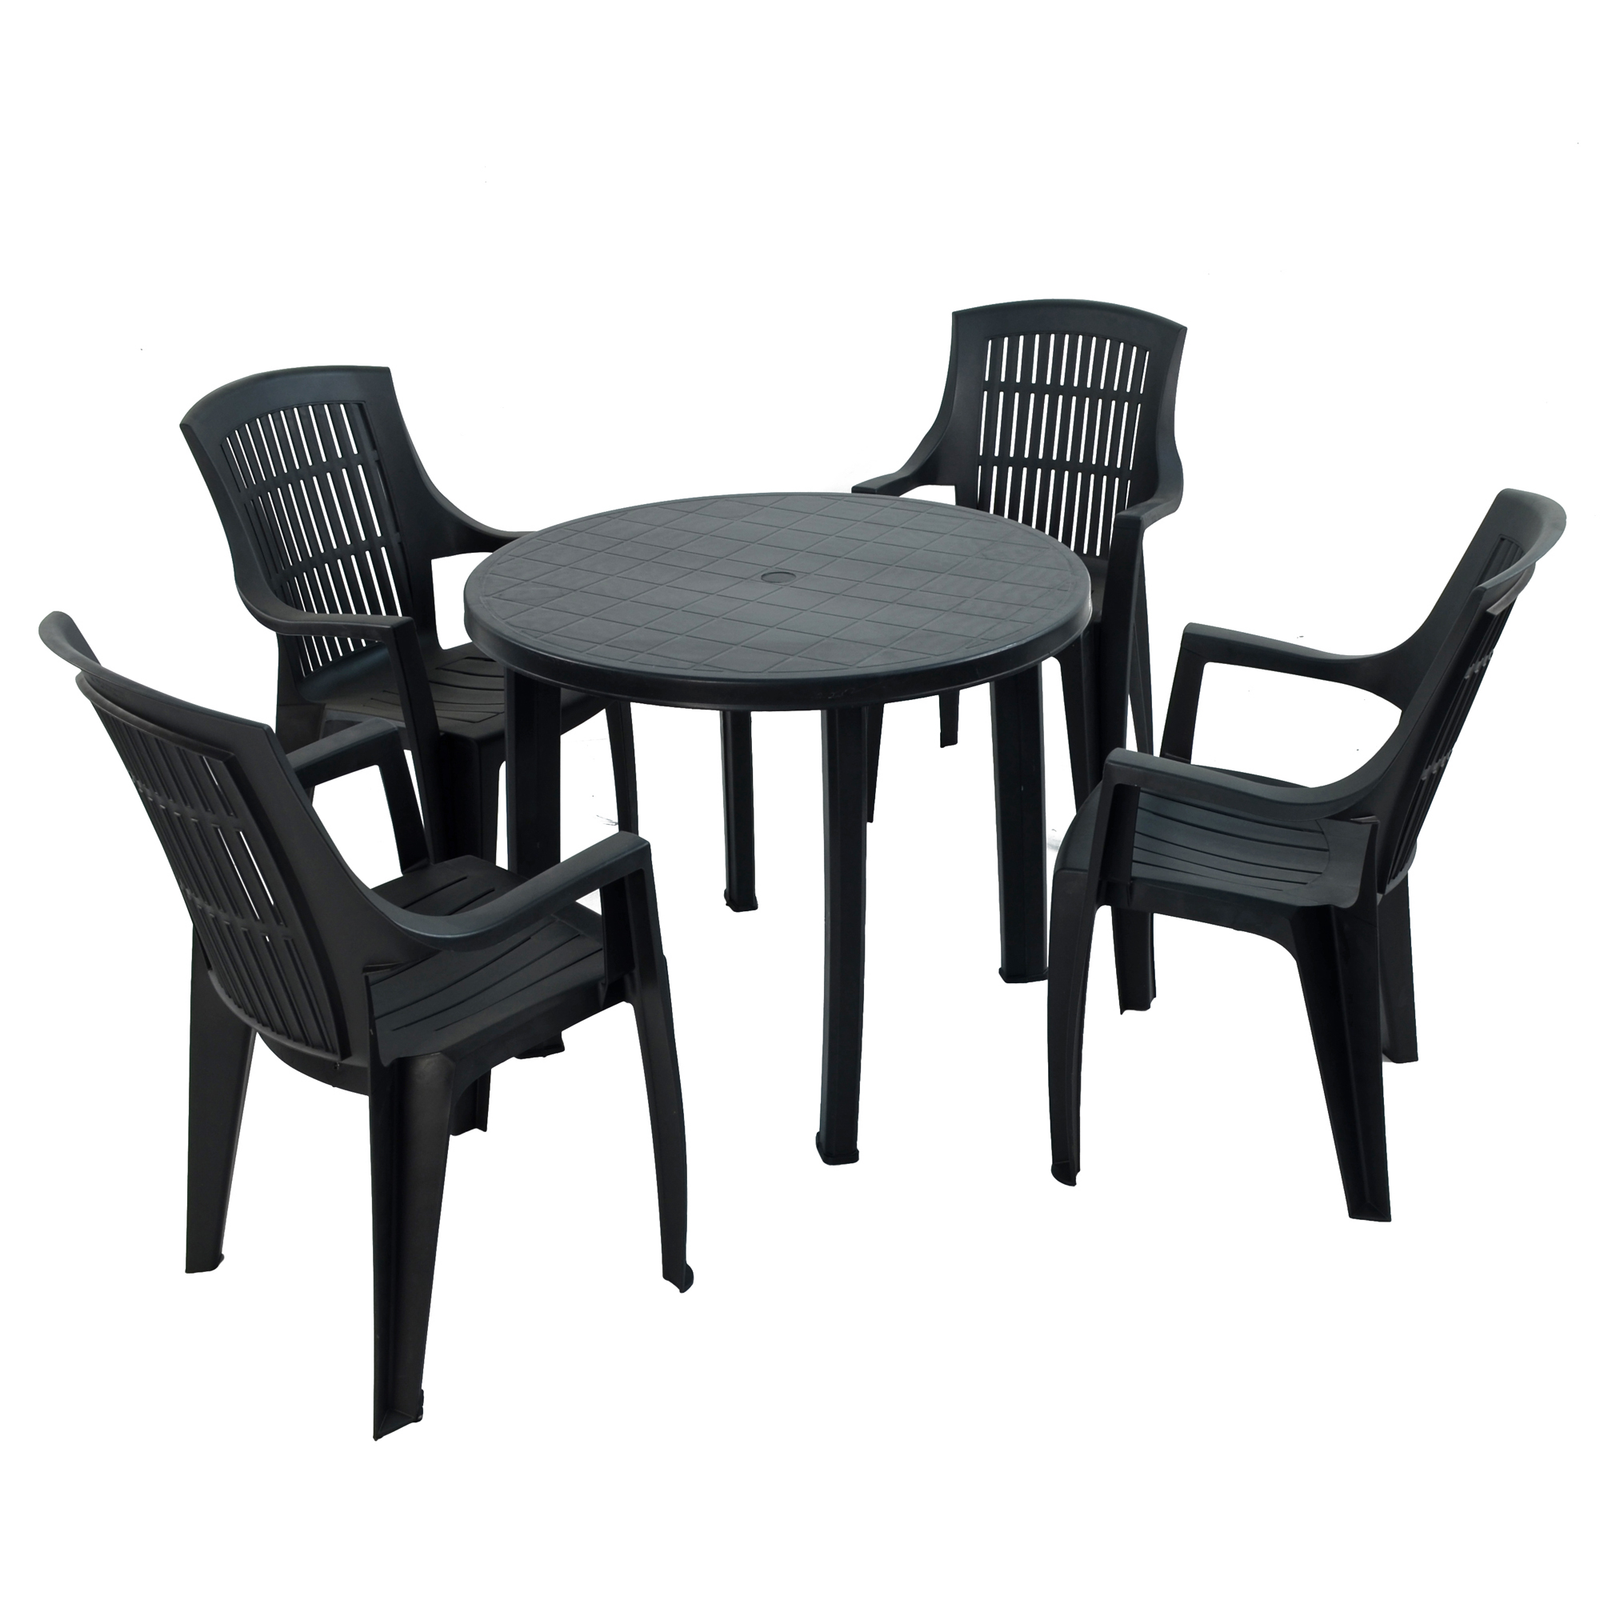 Trabella Revello Round Table With 4 Parma Chairs Set Anthracite Grey Dining Sets Trabella   